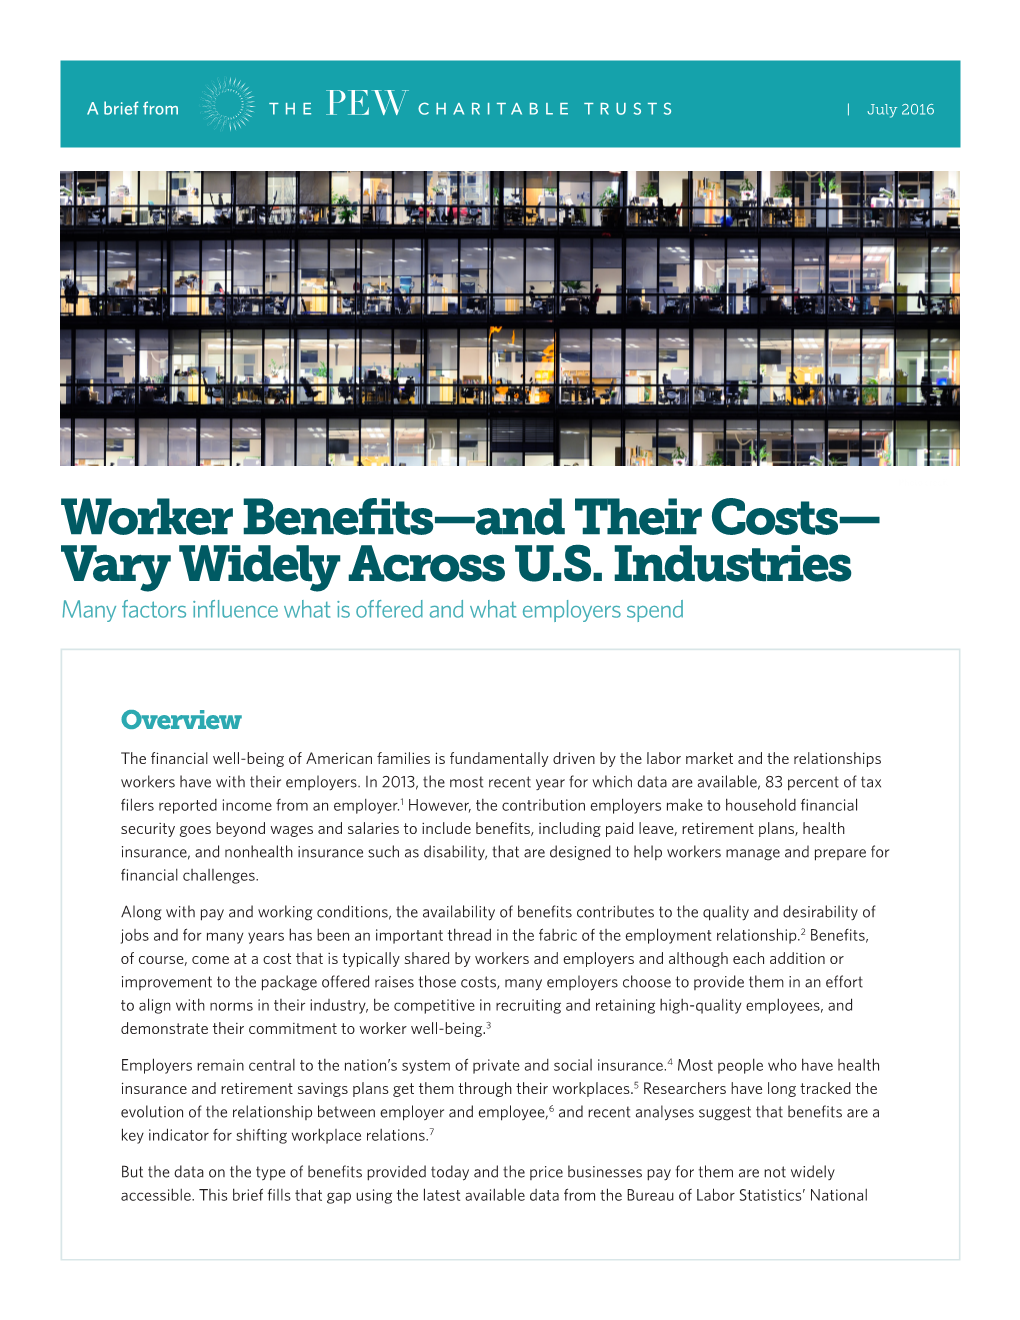 Worker Benefits—And Their Costs— Vary Widely Across U.S. Industries Many Factors Influence What Is Offered and What Employers Spend